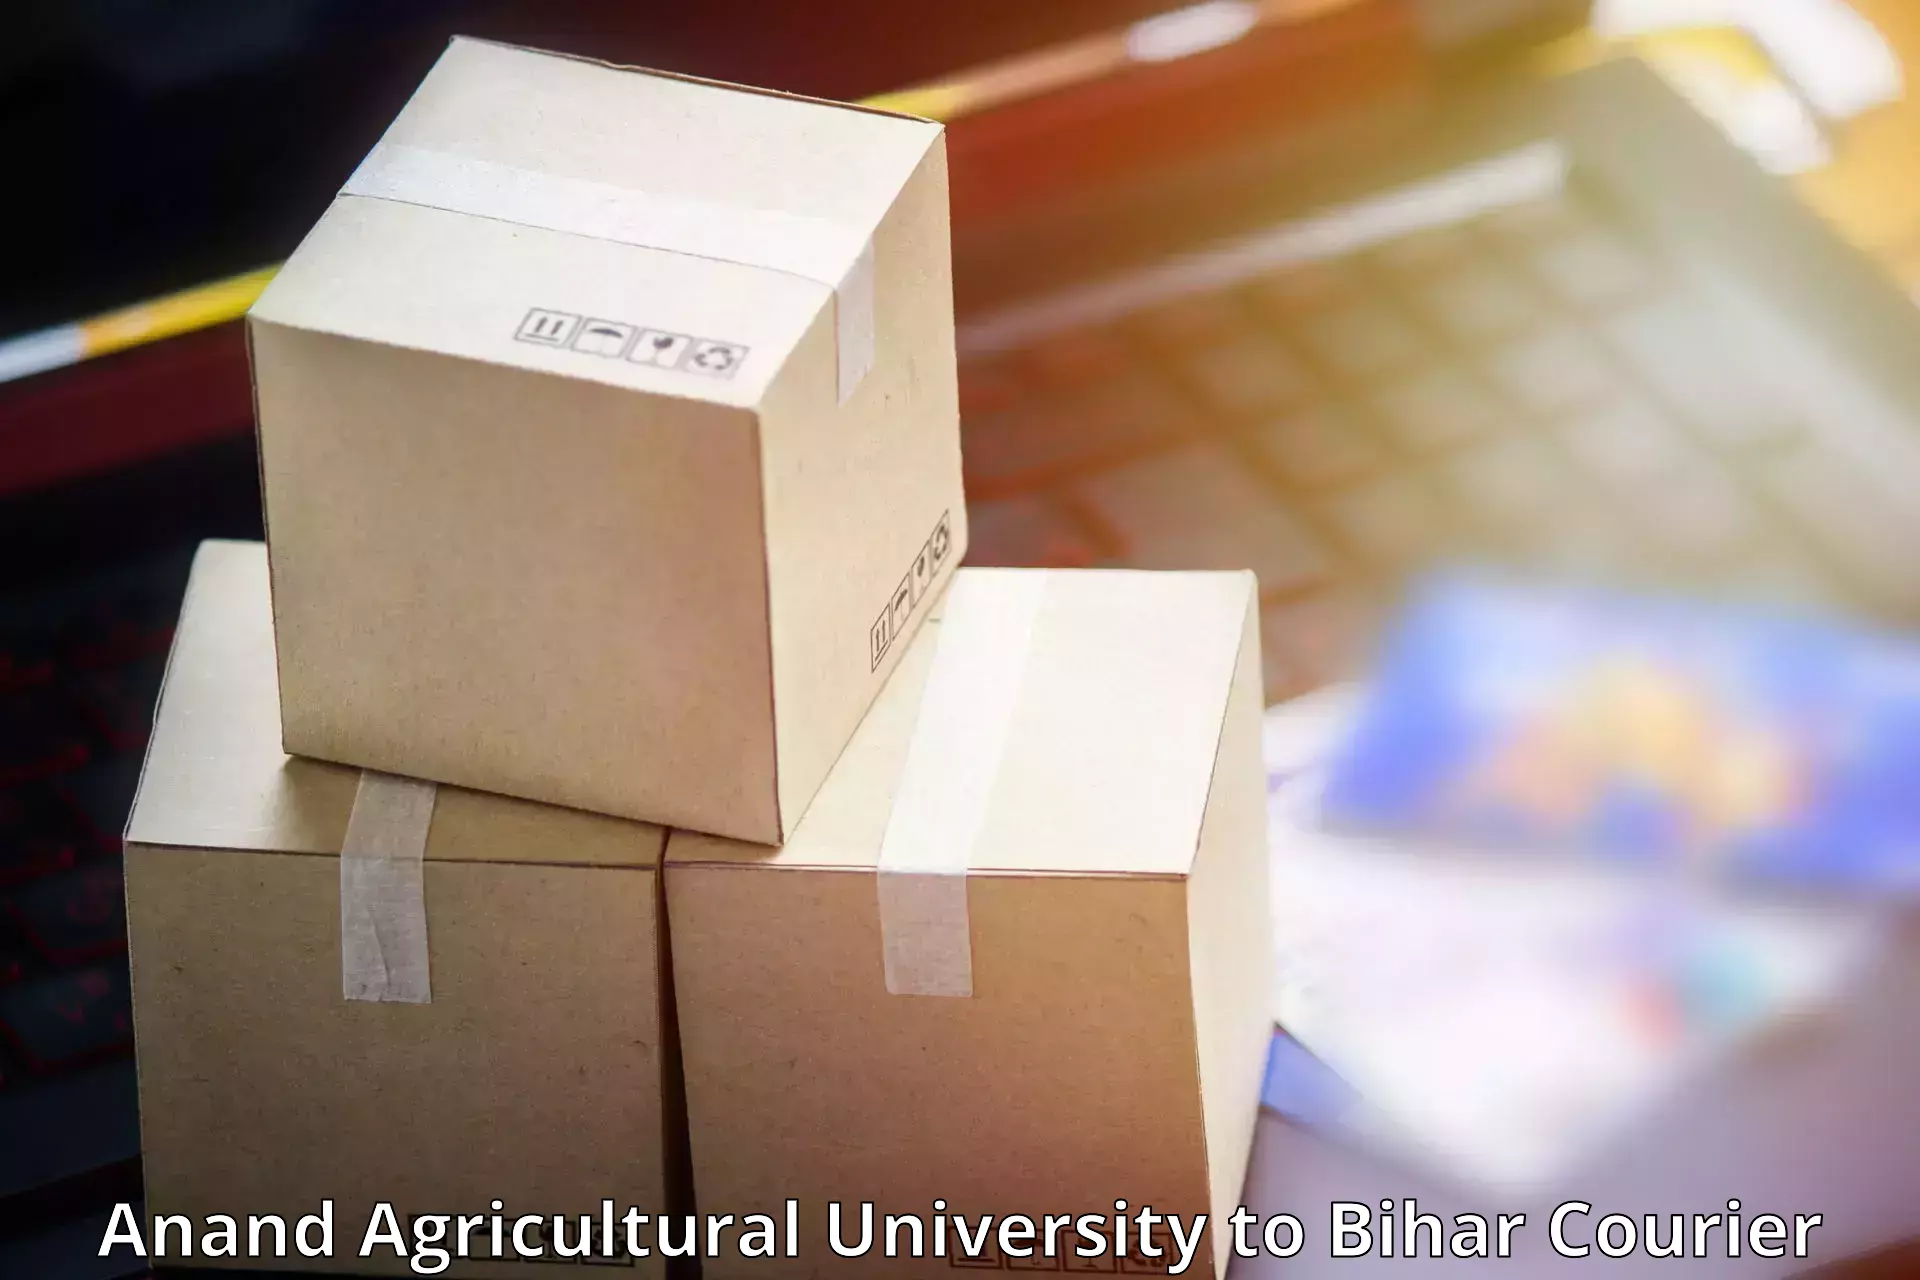 Ground shipping Anand Agricultural University to Katoria